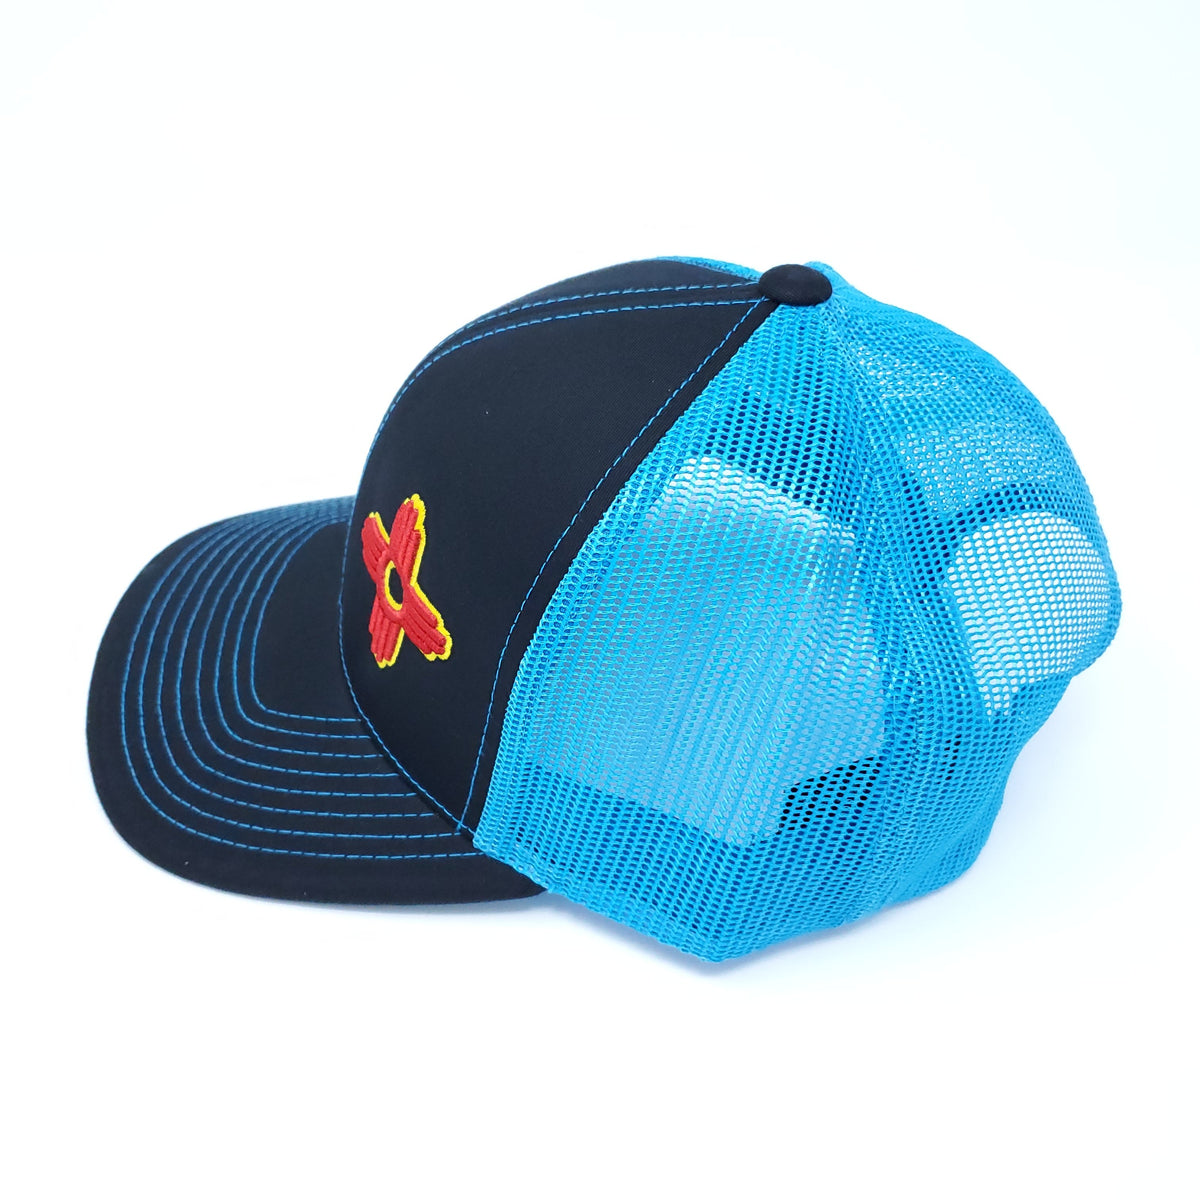 Neon Blue and Black Trucker Style Snapback with Embroidered Zia Symbol - Ragged Apparel Screen Printing and Signs - www.nmshirts.com